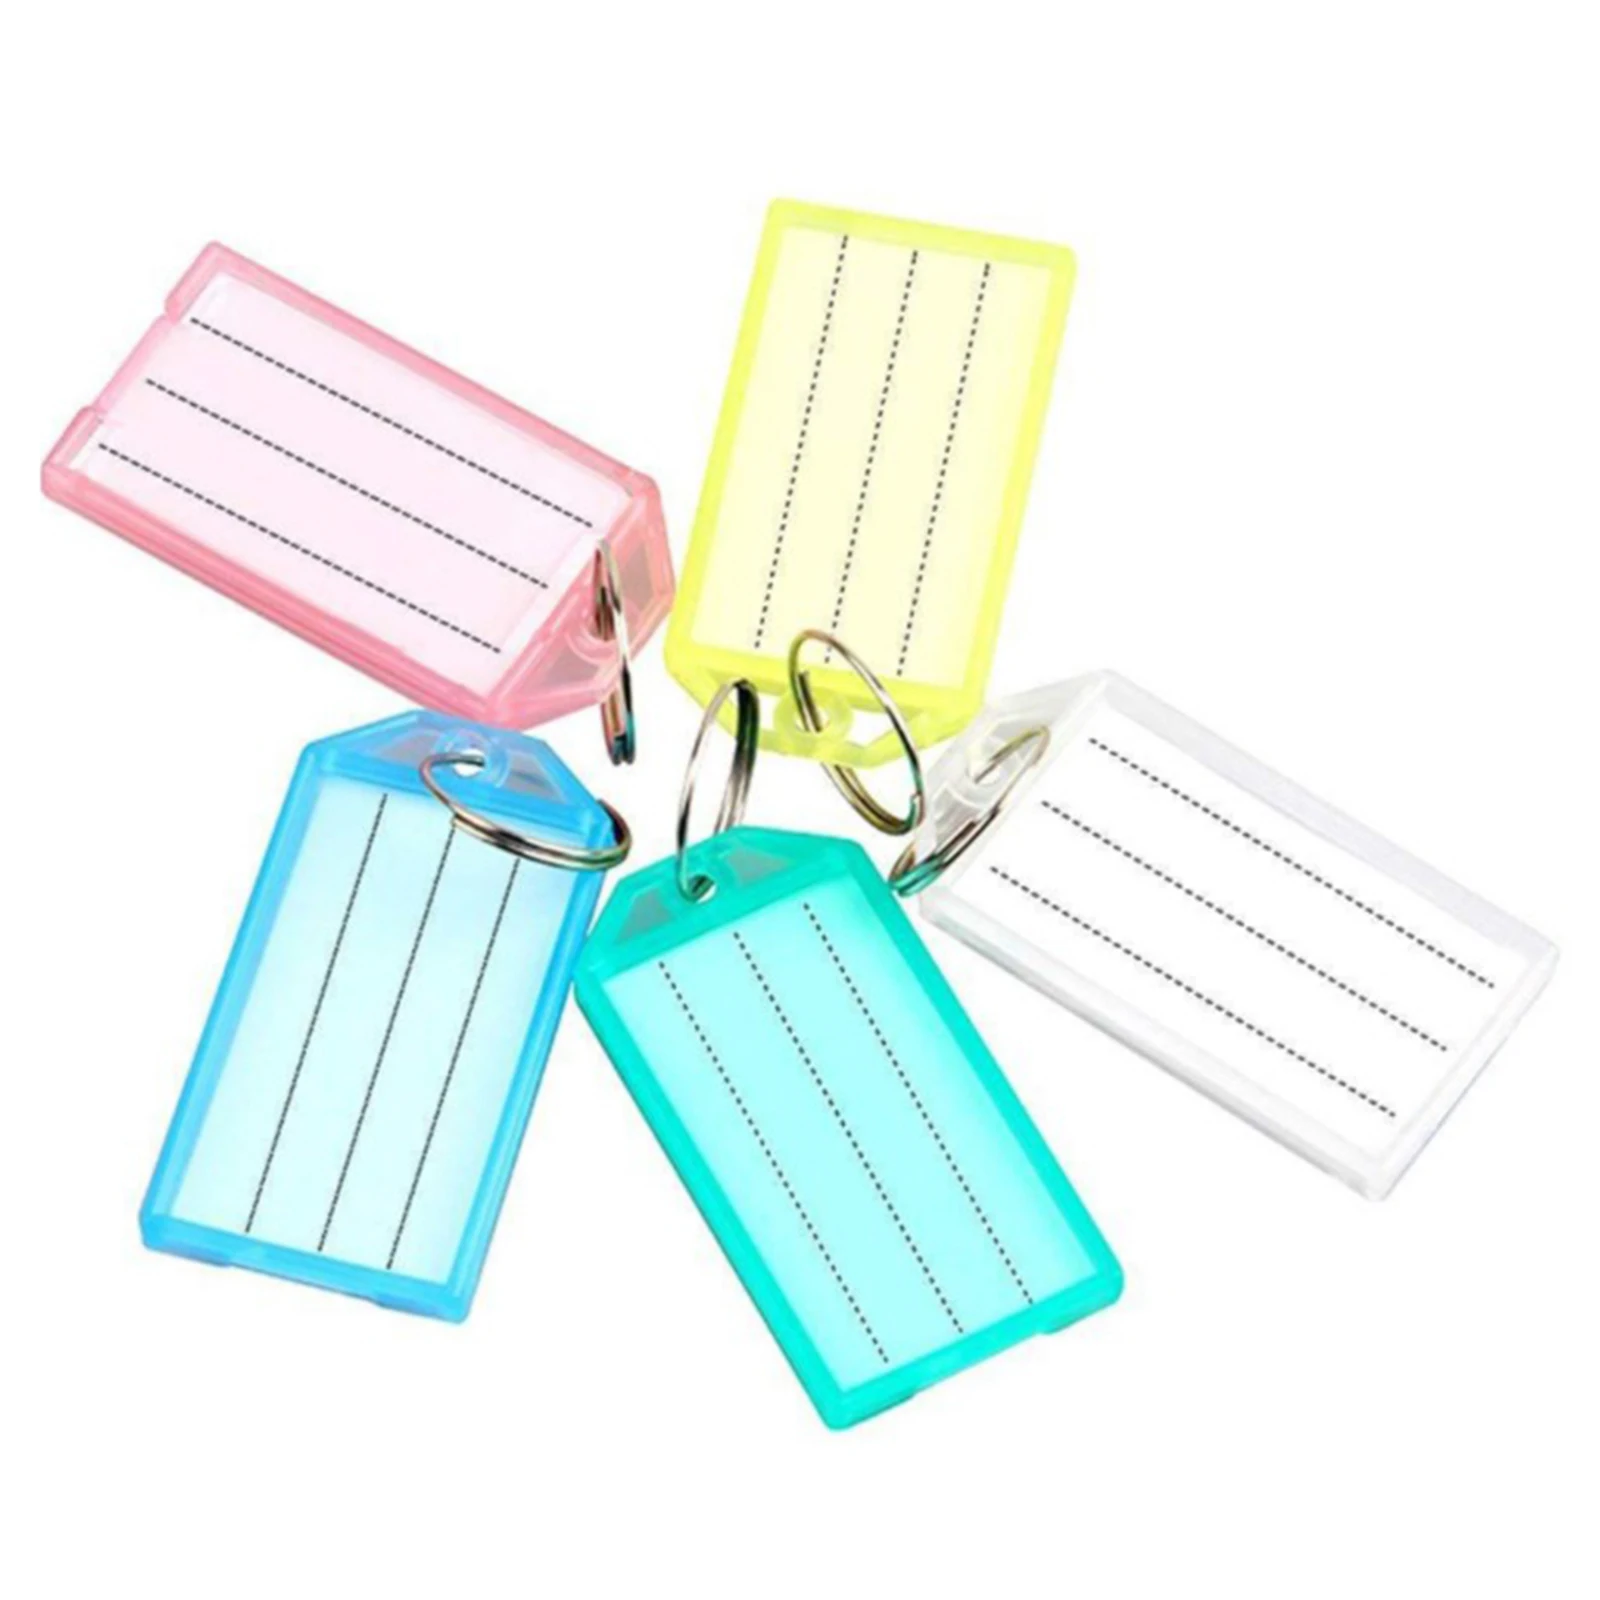 

10PC Luggage Tag Boarding Shipping Plastic Baggage Tags Women Men Suitcase ID Address Name Holder Bag Label Travel random